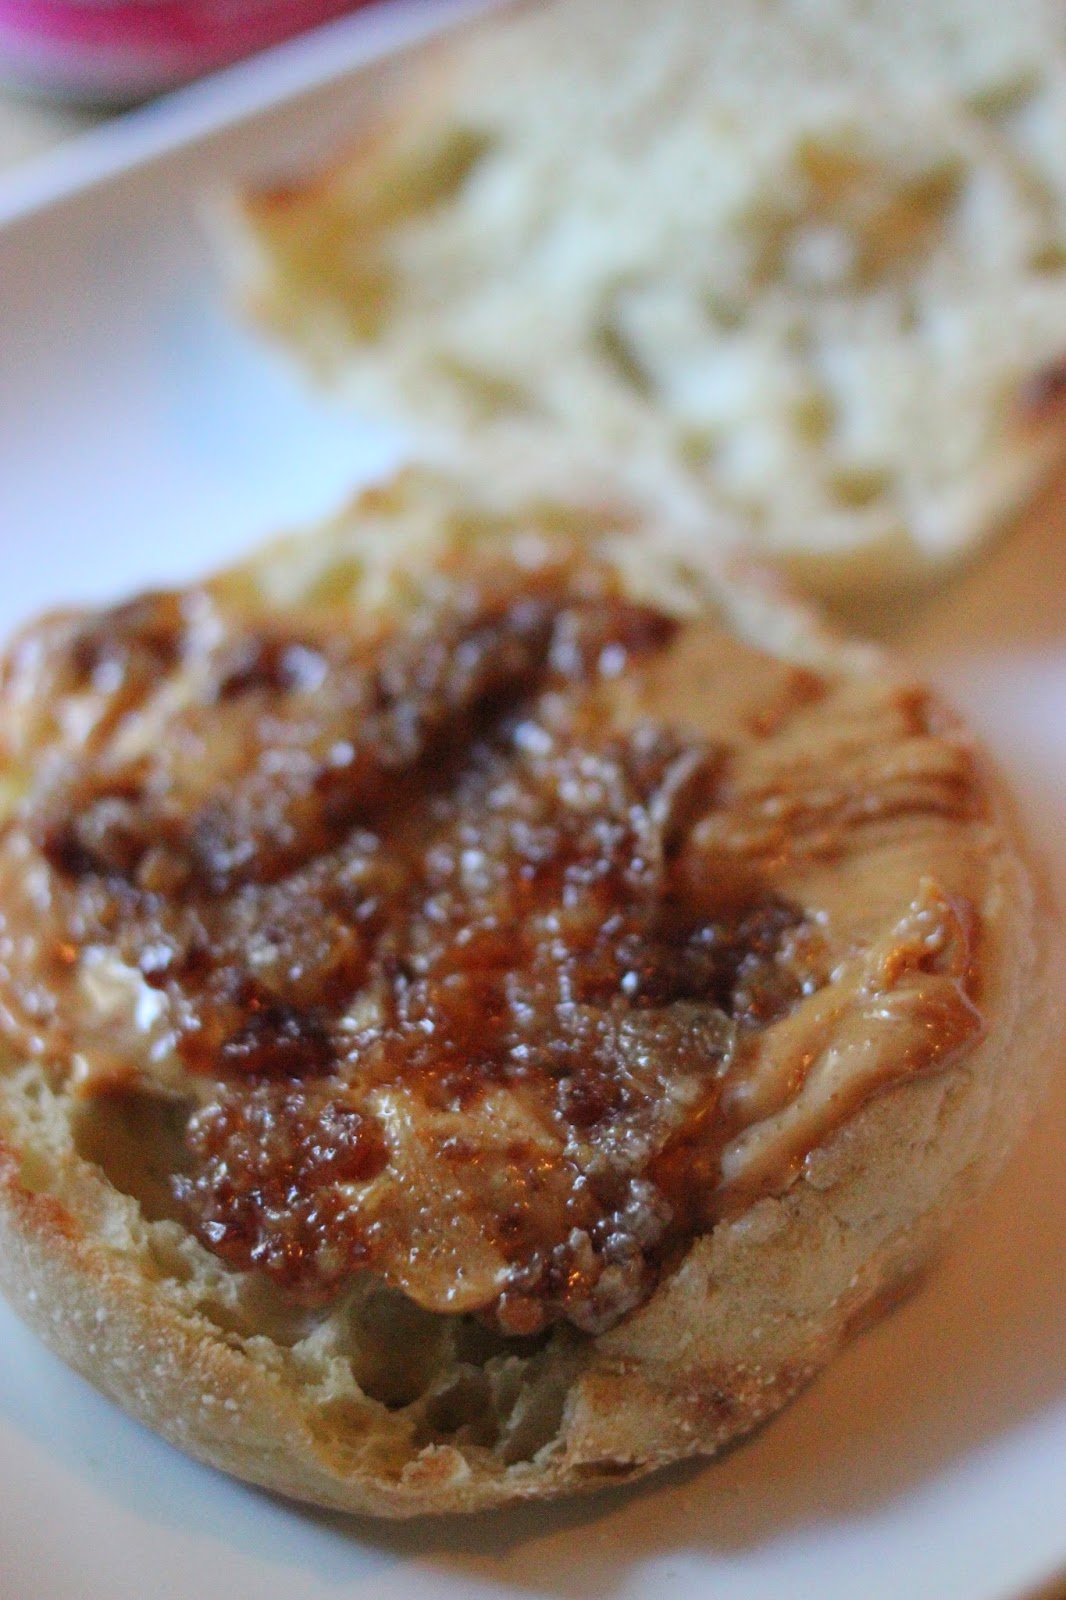 The Elvis Breakfast Sandwich with bacon jam.  It consists of peanut butter, spreadable bacon, and bananas on an English muffin.    Bacon Jams review.